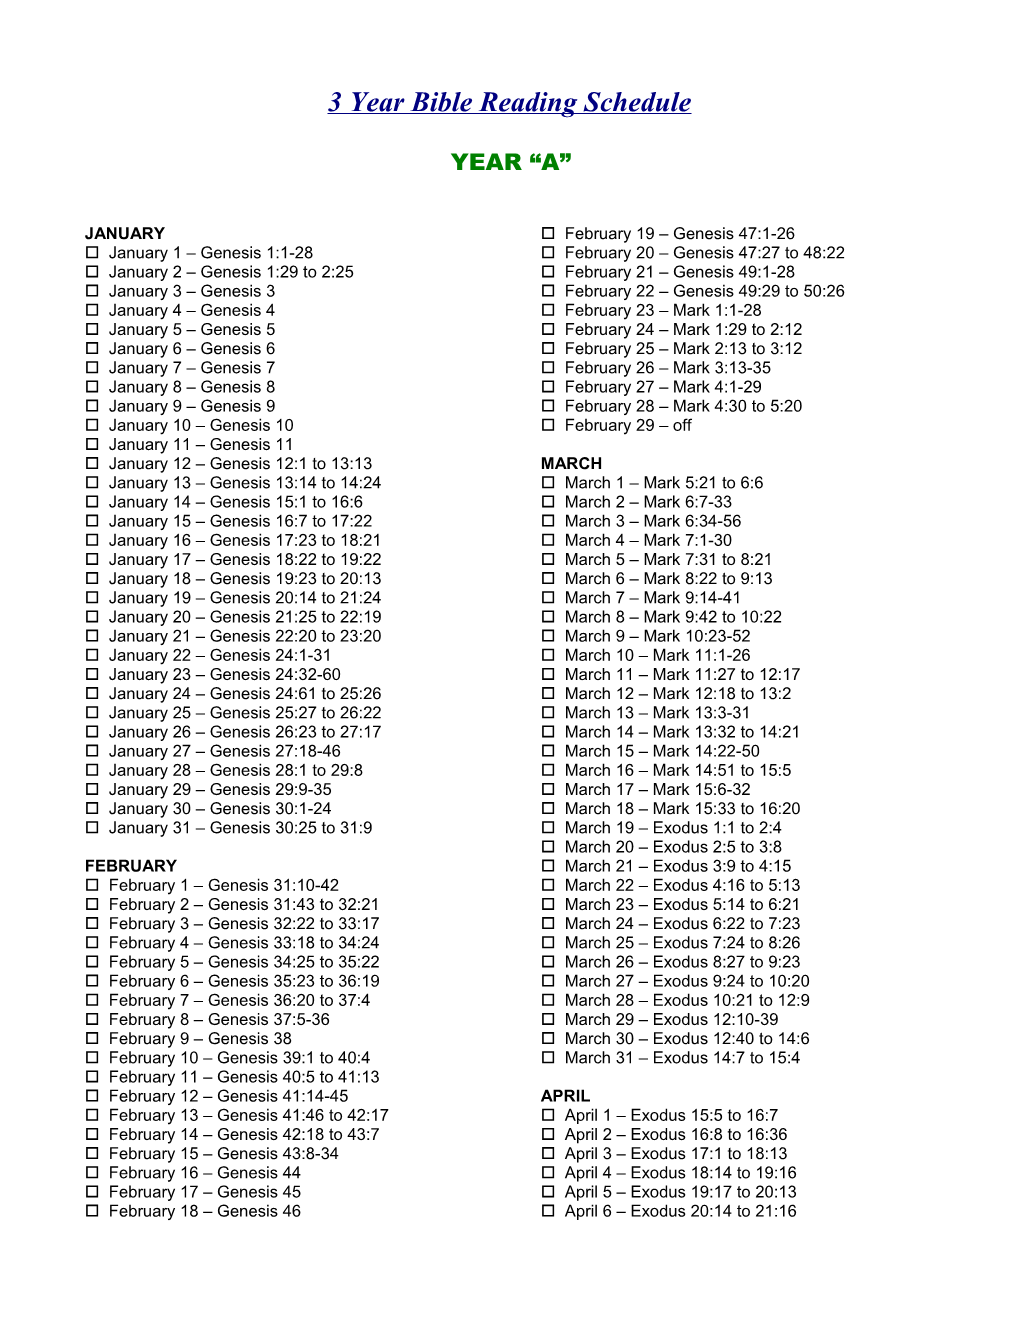 3 Year Bible Reading Schedule